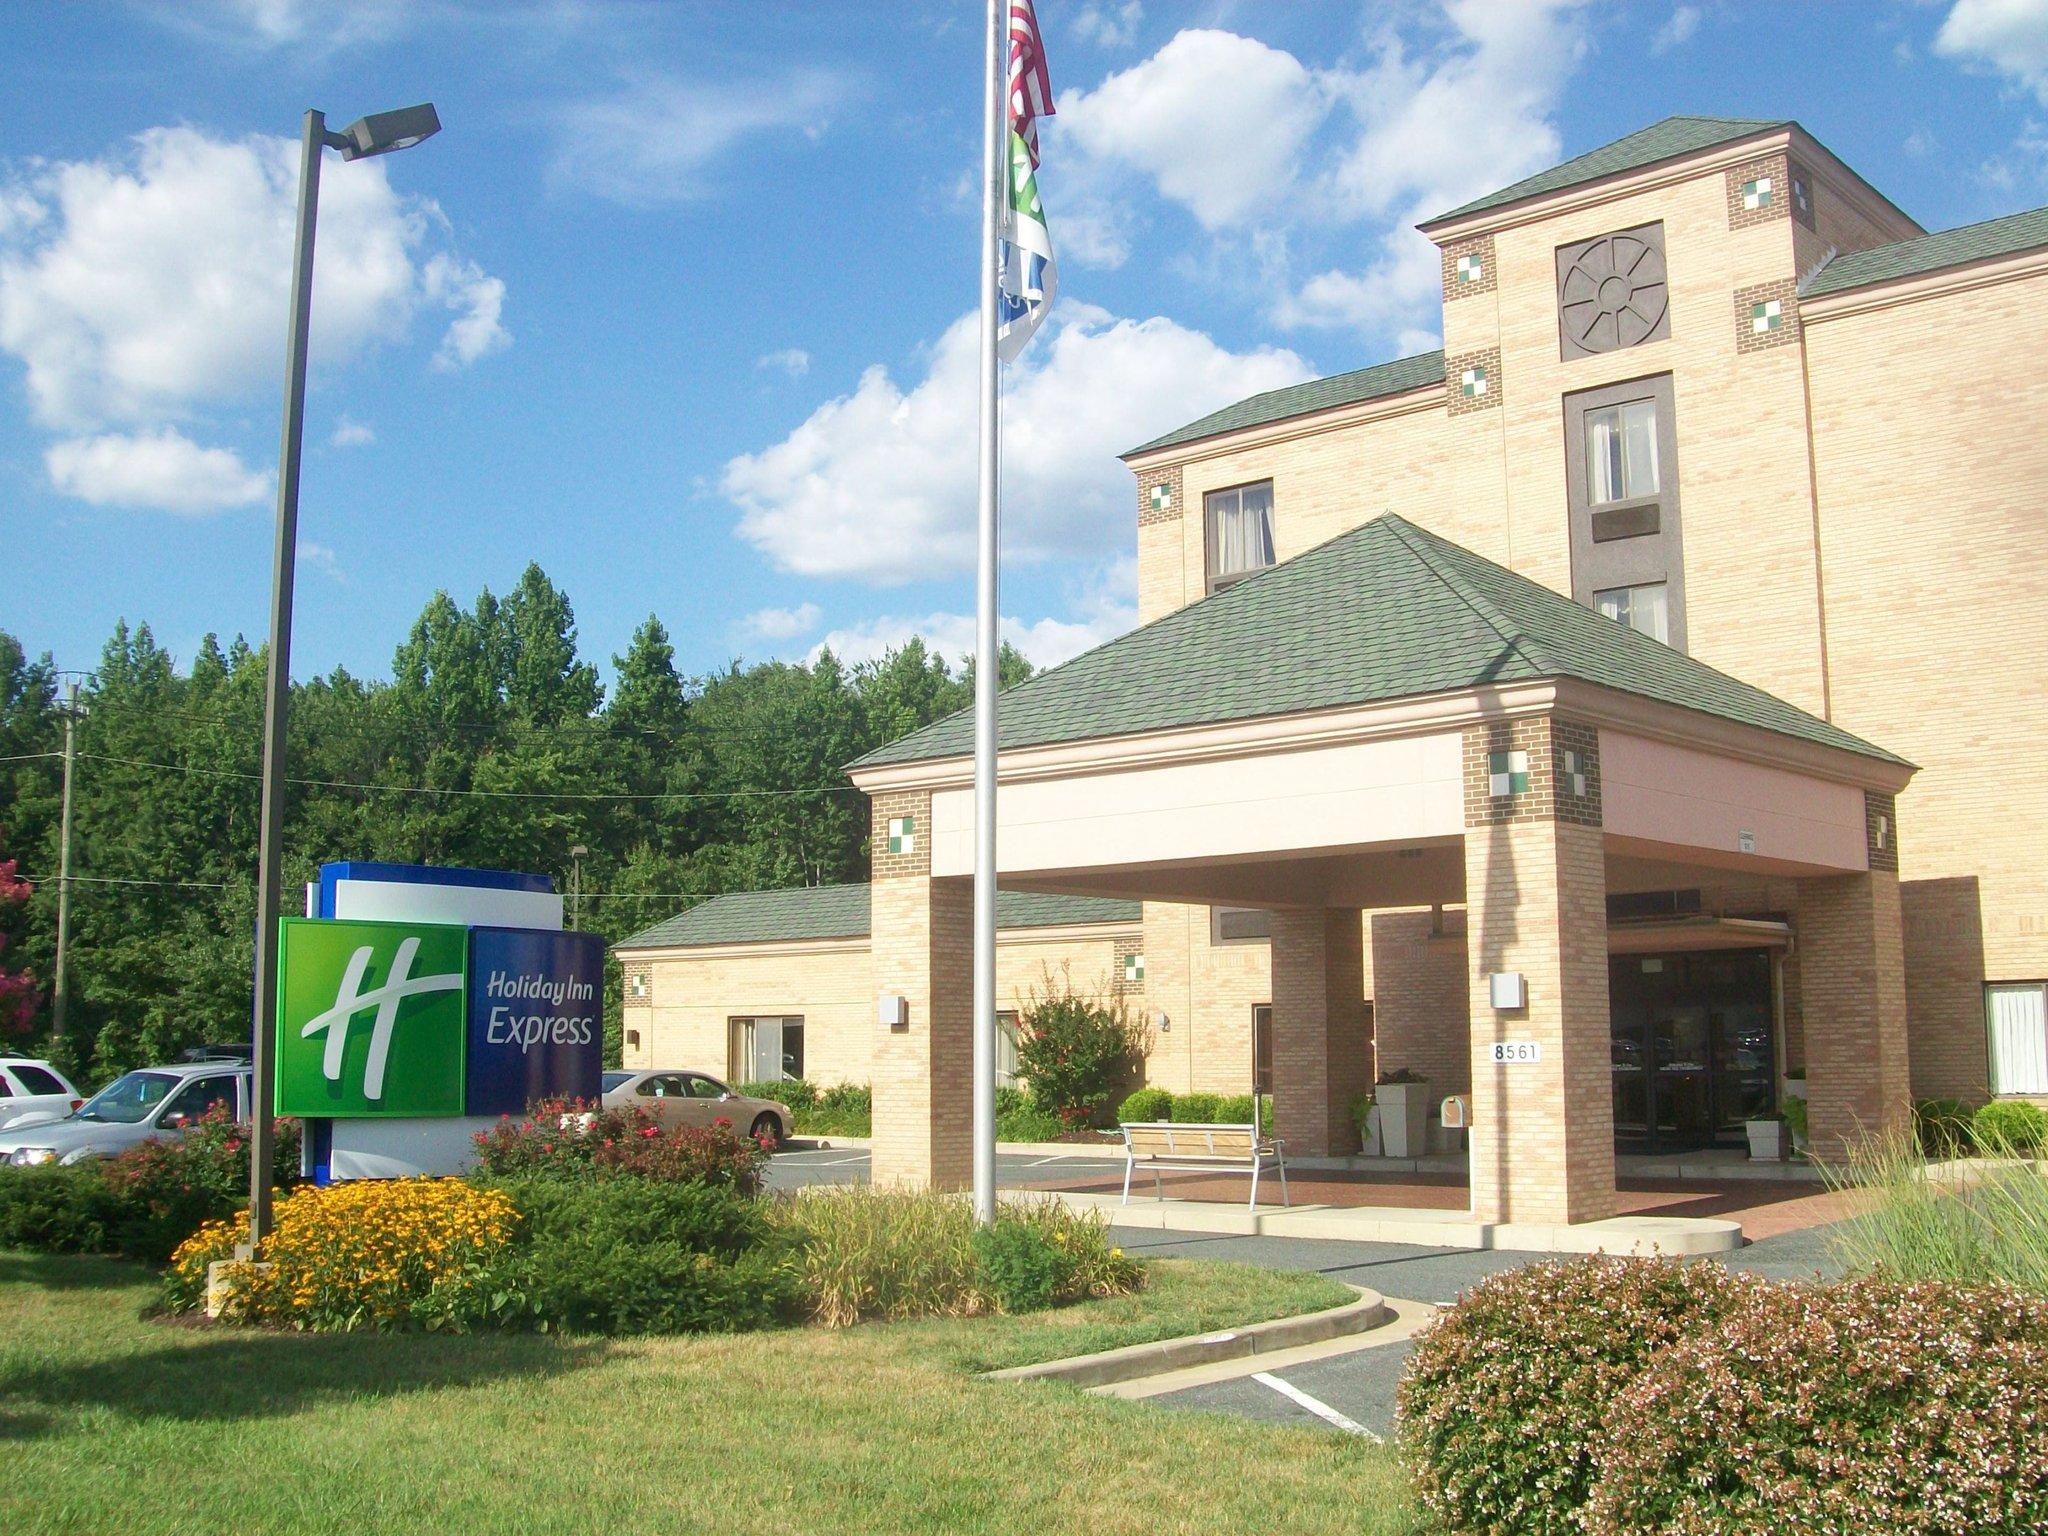 Holiday Inn Express Easton in Easton, MD